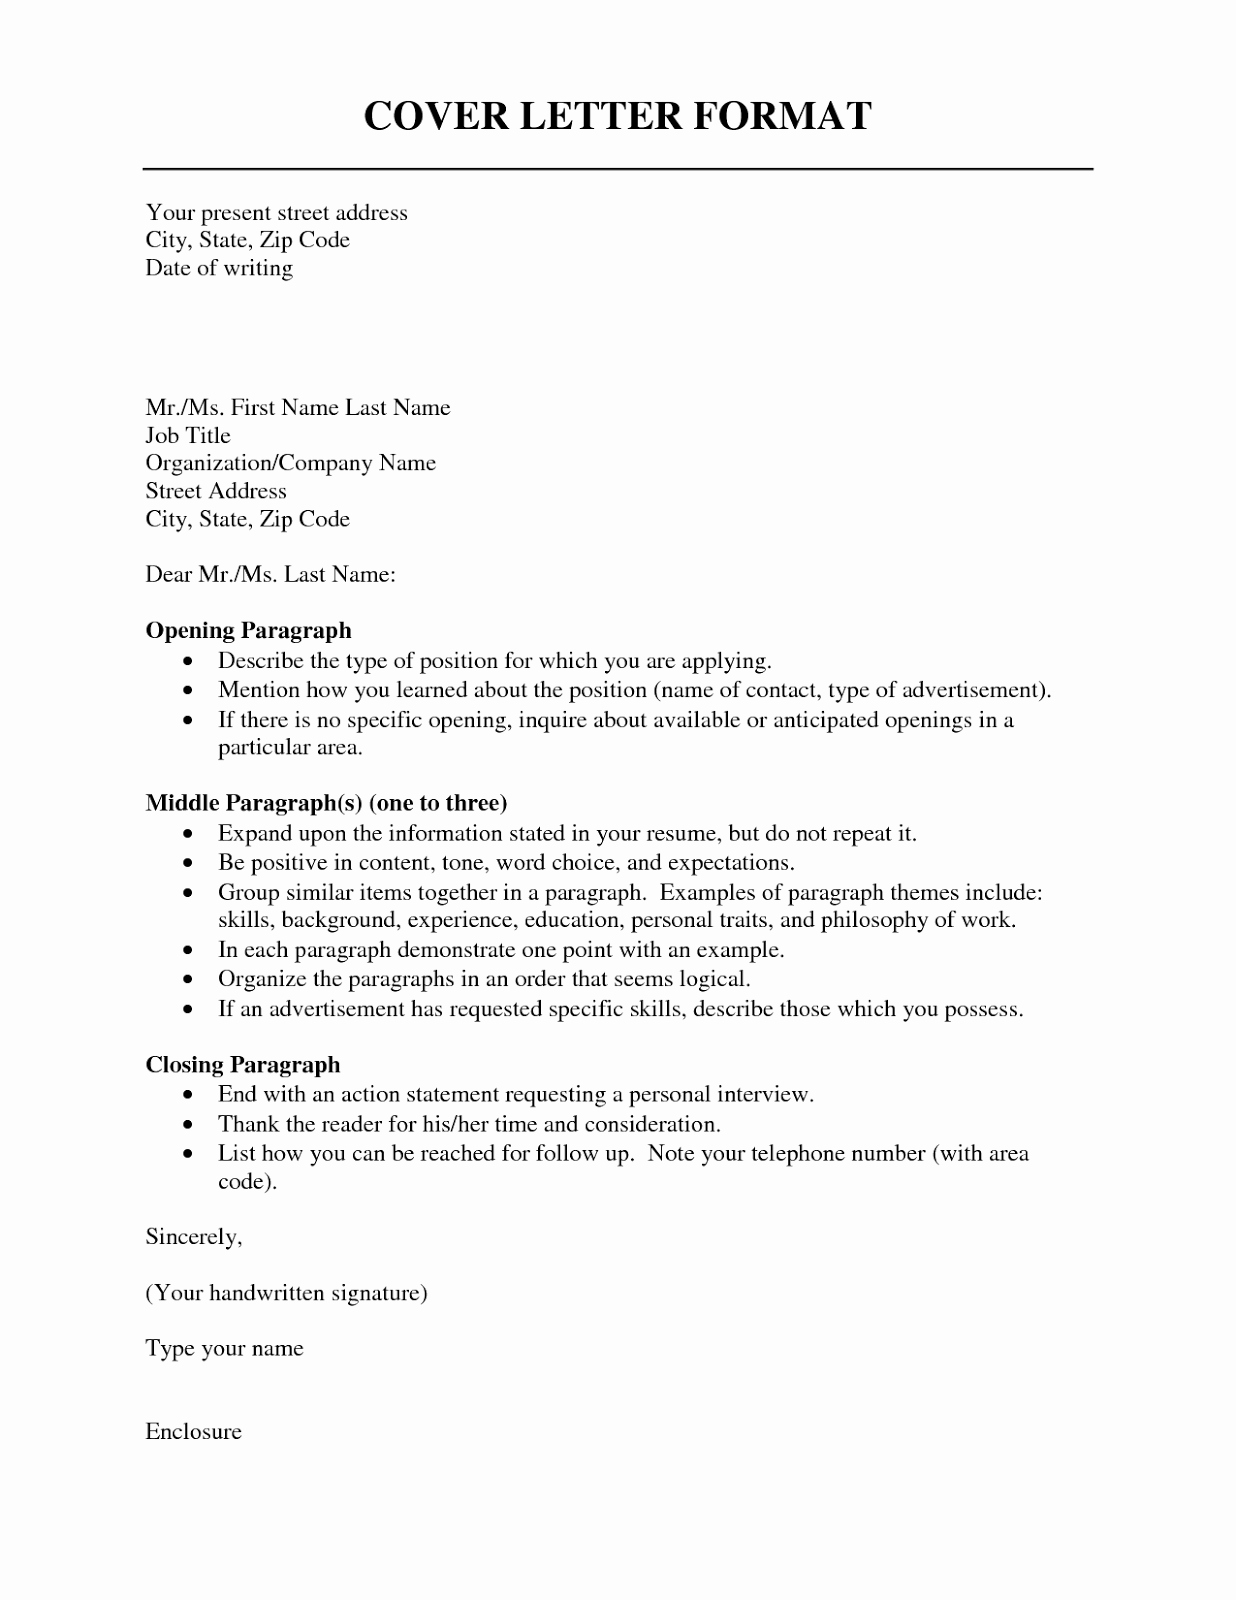 Resume and Cover Letter formats Lovely Cover Letter format Resume Cv Example Template